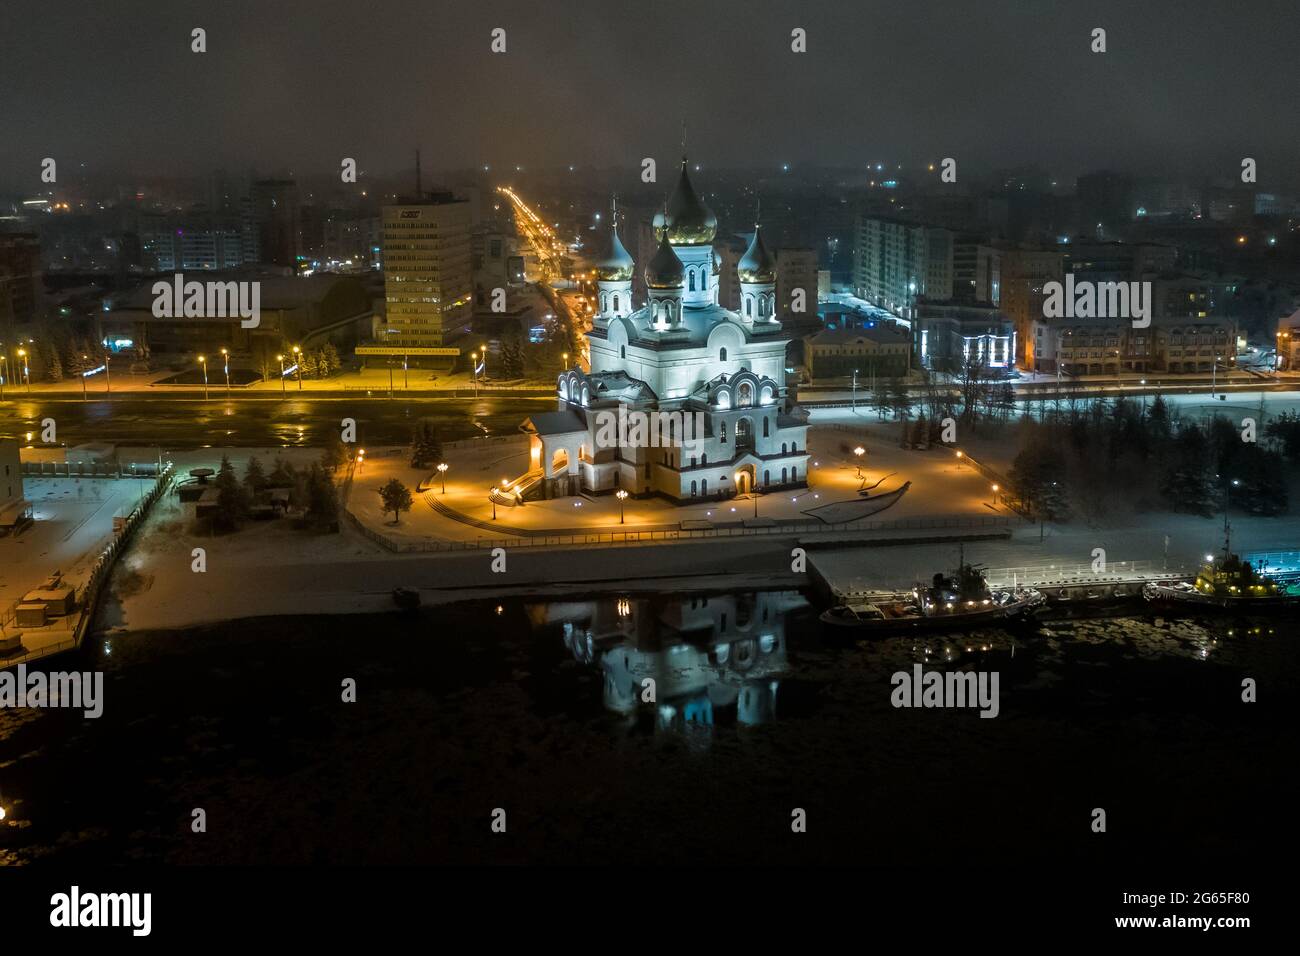 Arkhangelsk, Russia - November 25, 2020:View of the church from above at night. Church at night in the lights of illumination. Stock Photo